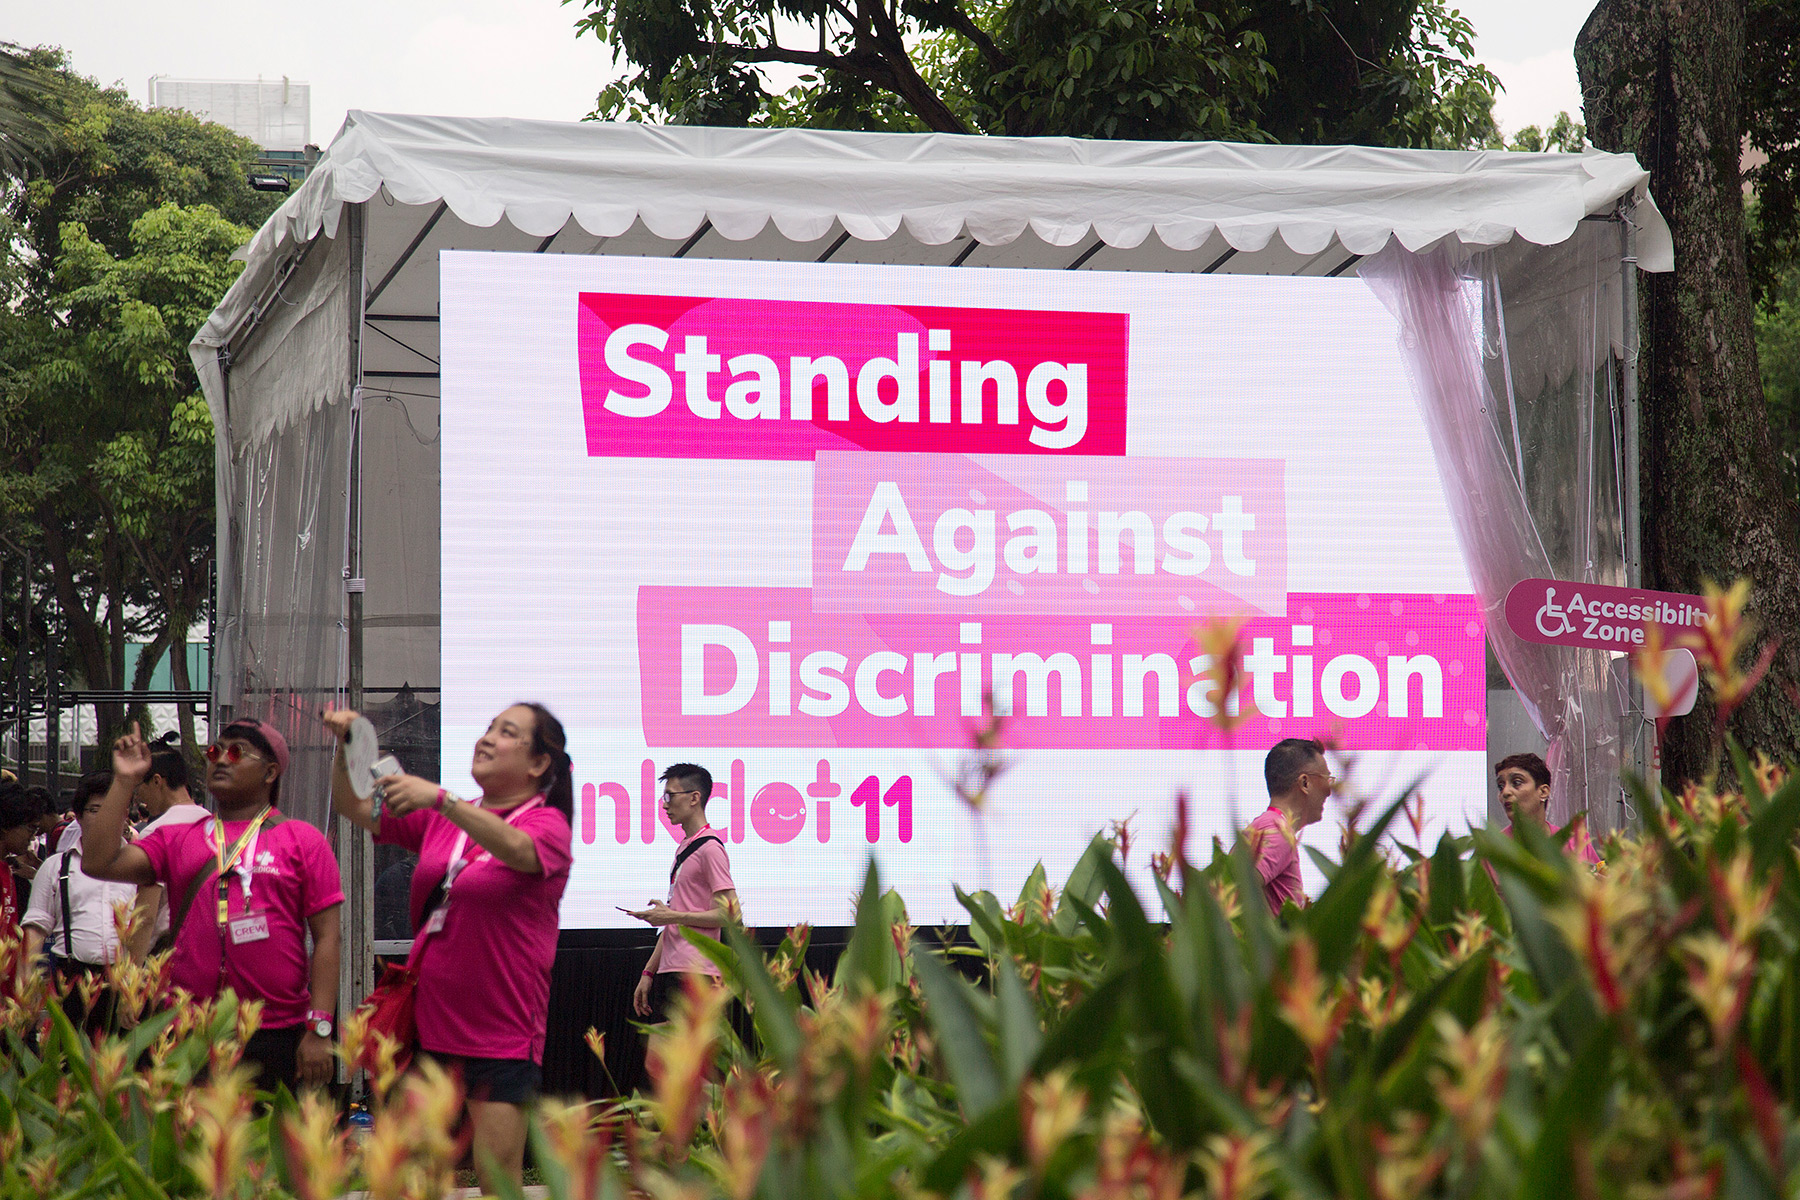 People walking past a pink and white banner that says 'Standing Against Discrimination' on it